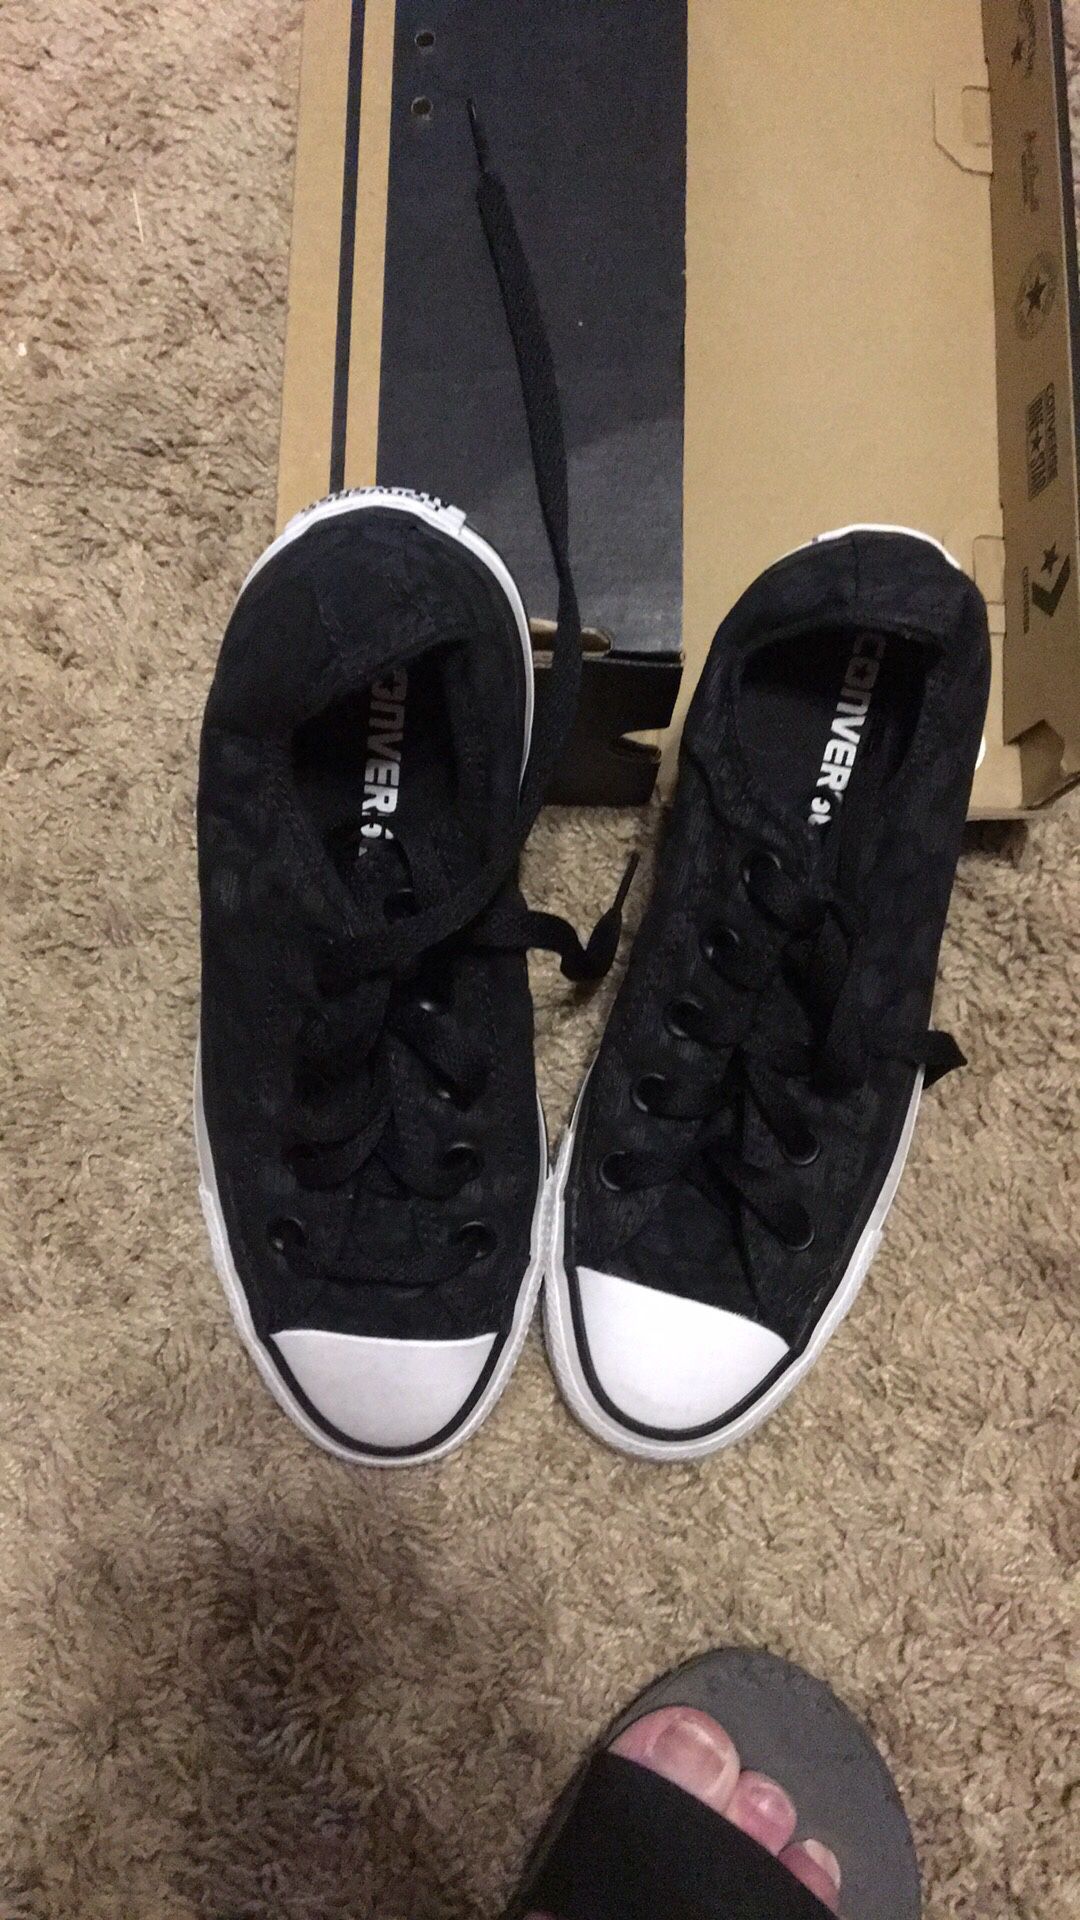 Converse brand new size 6 sneakers